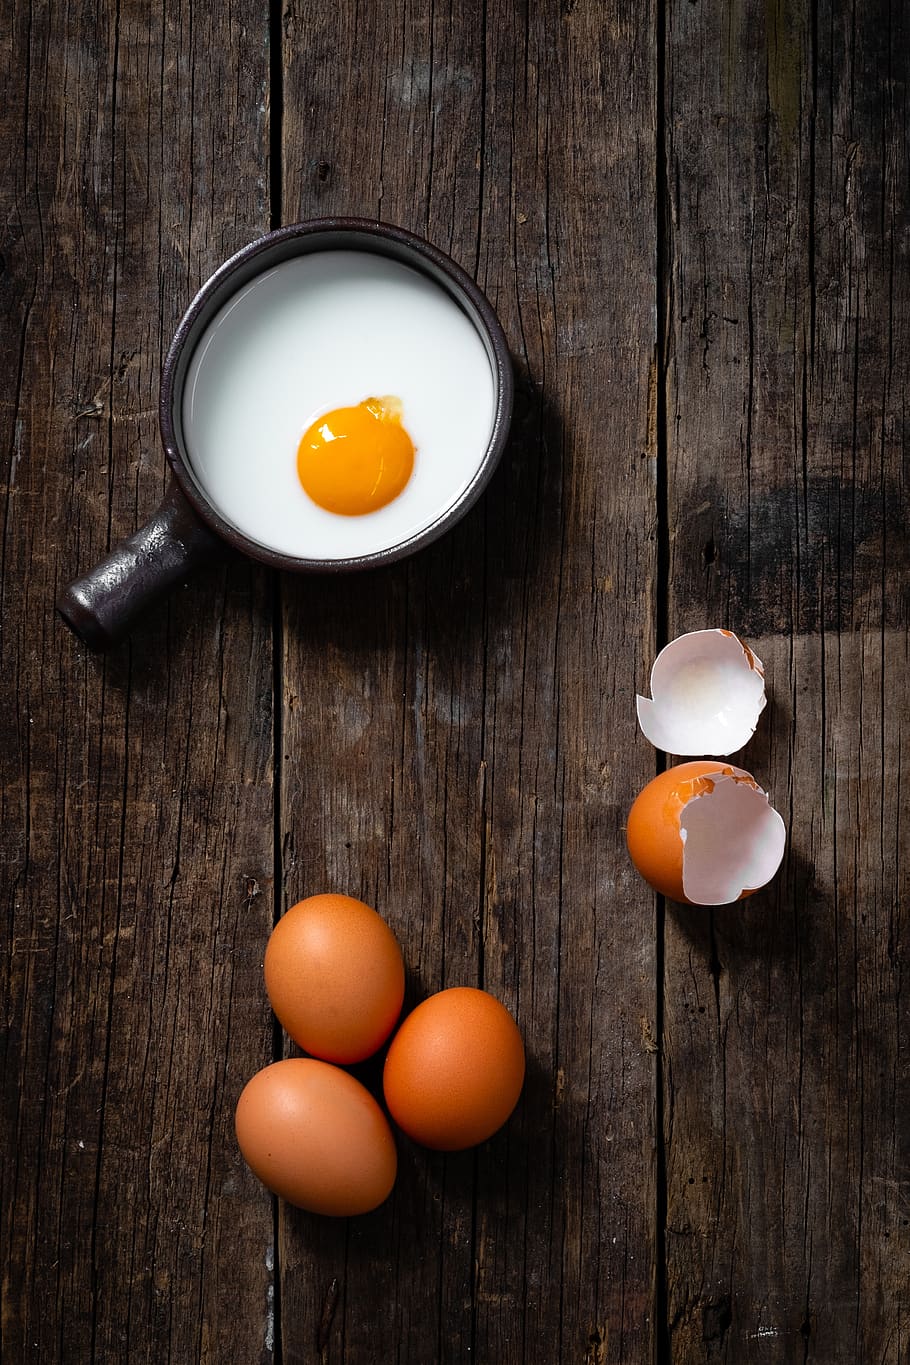 egg, eggs, food, protein, colorful, cook, cooking, table, wood, broken